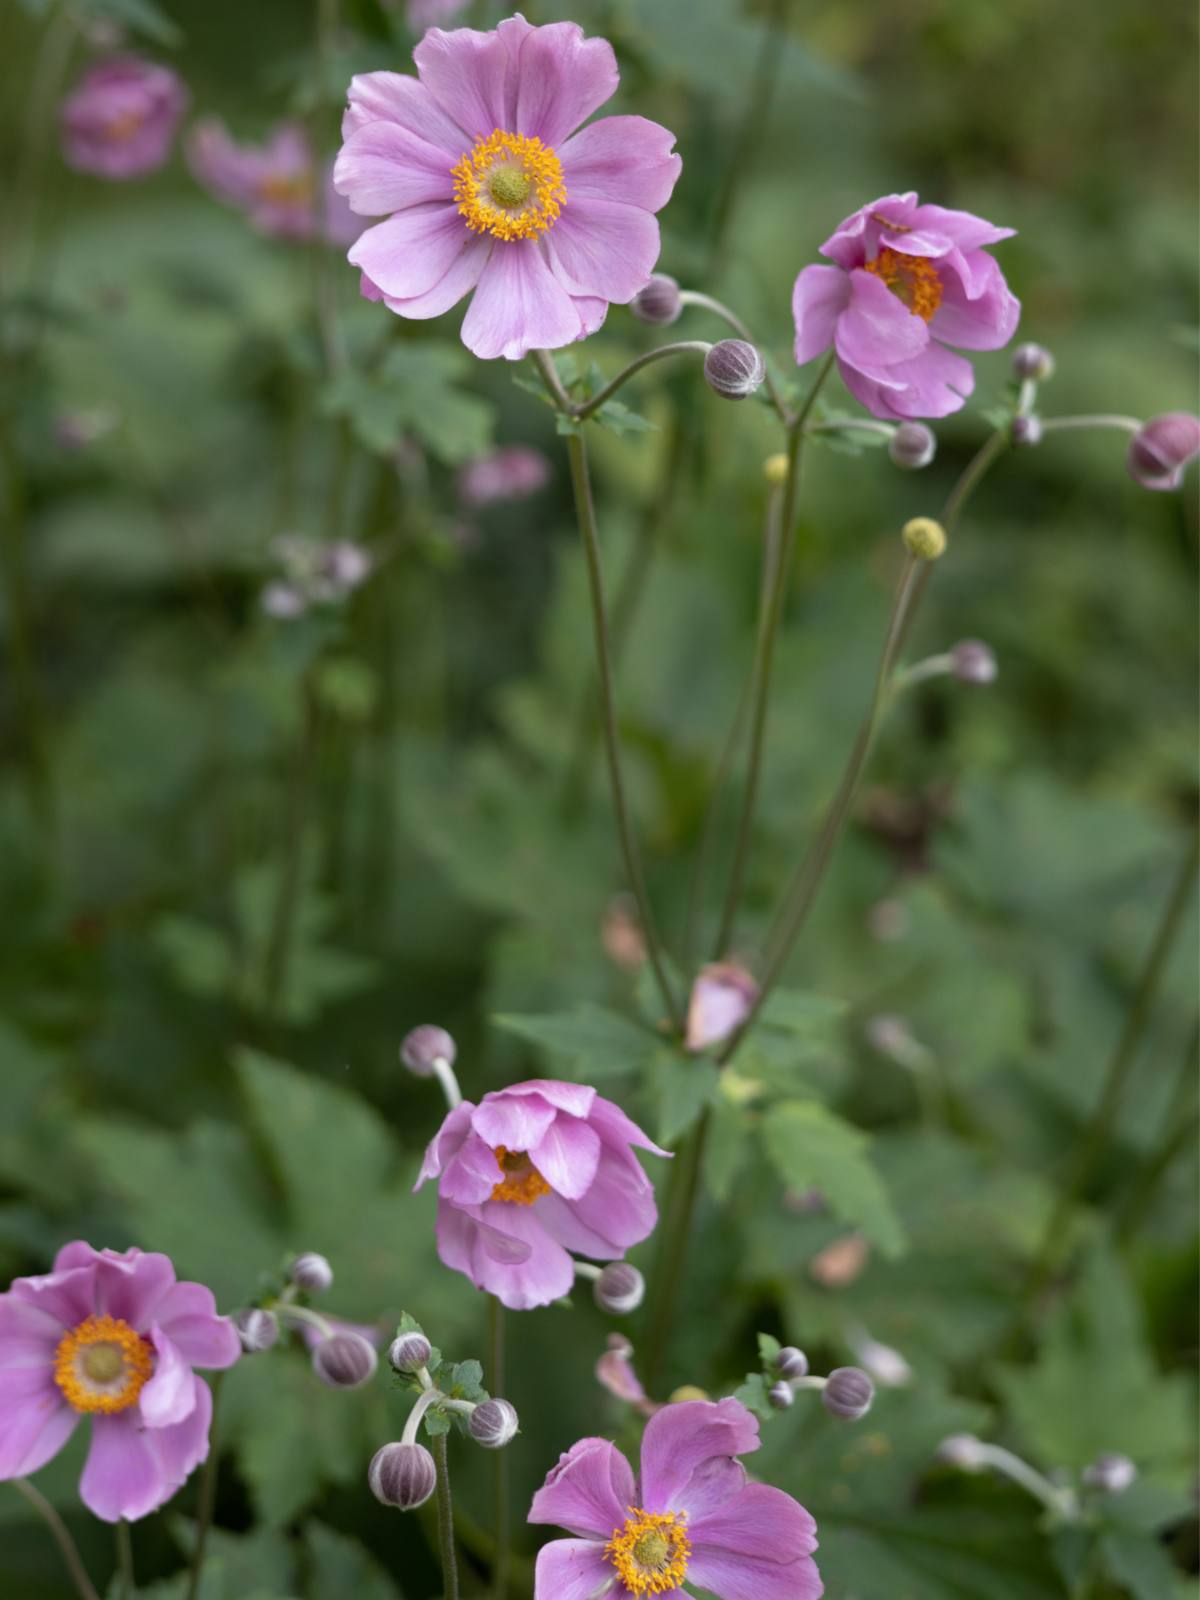 How to Care for Anemone Plant: A Guide